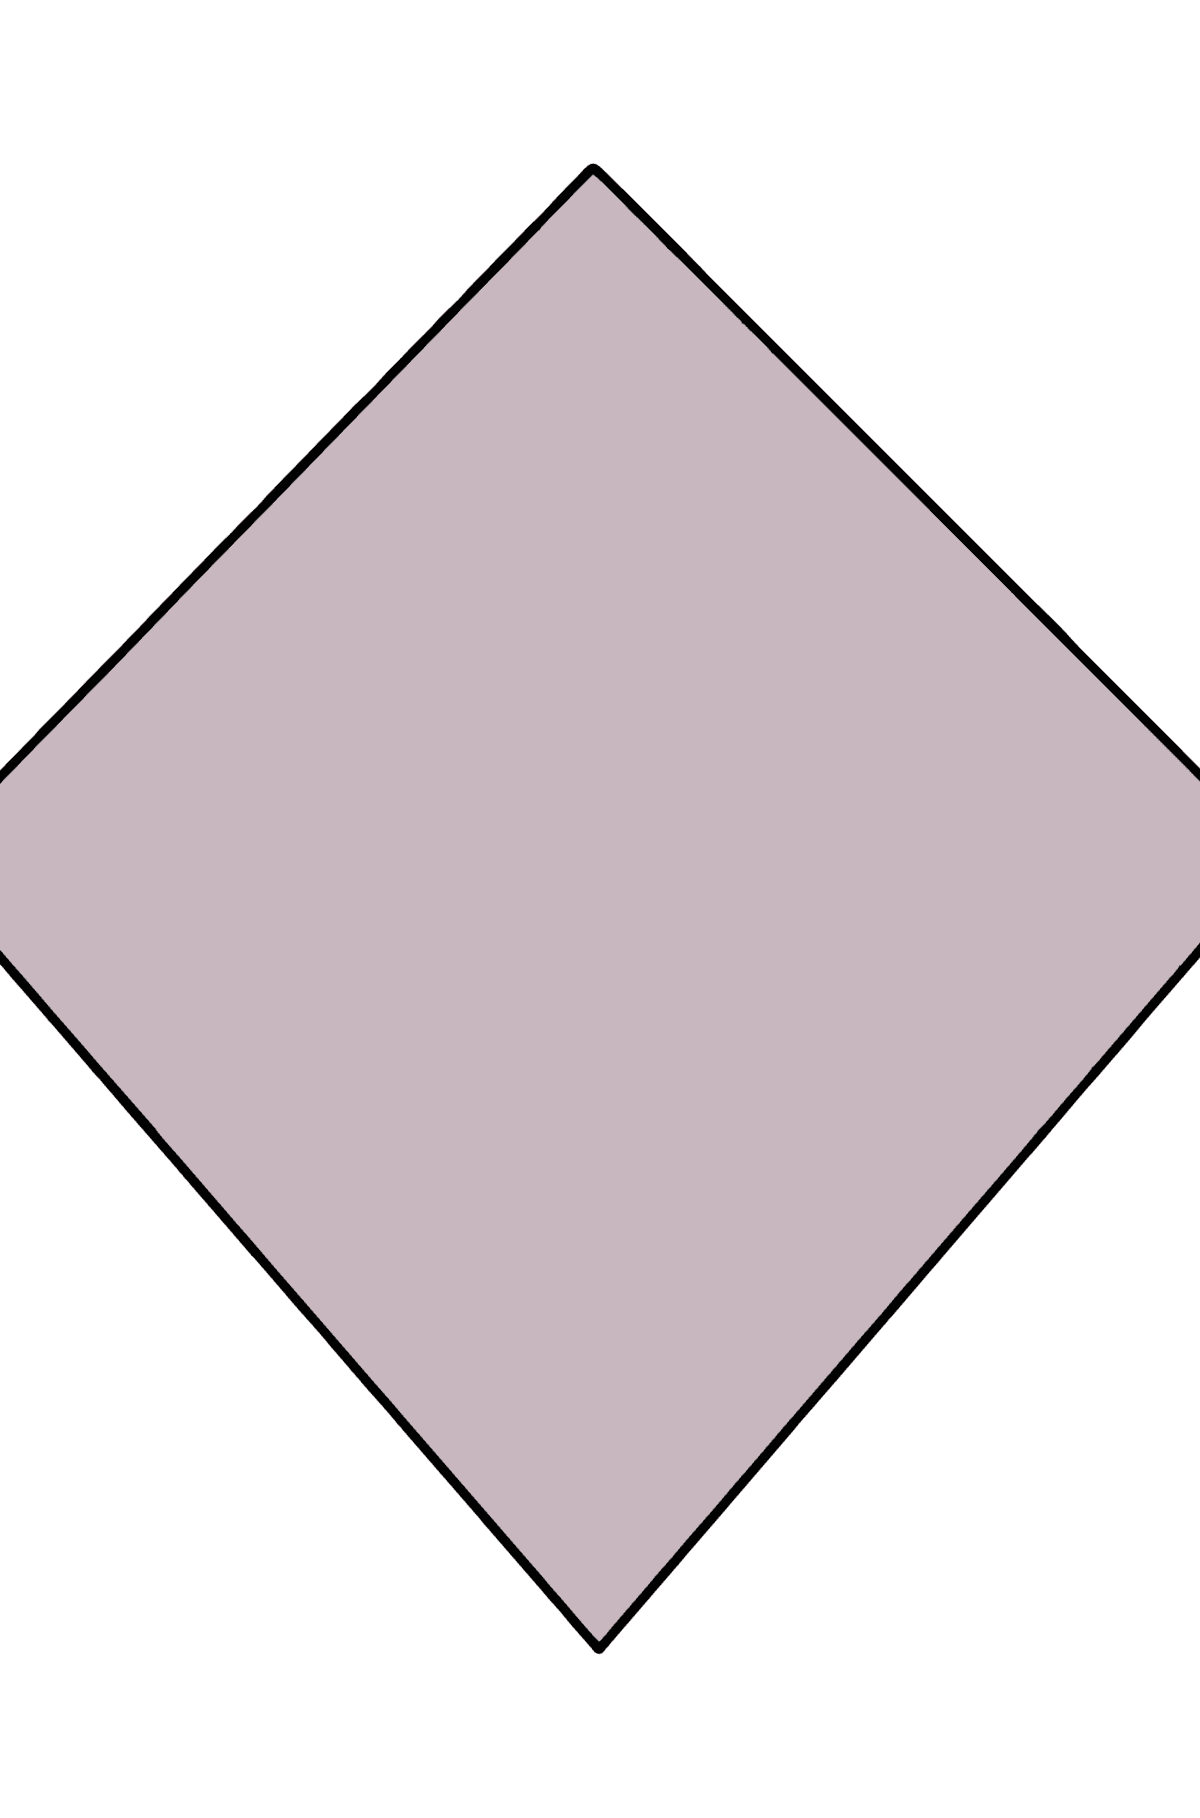 Rhombus coloring page - Coloring Pages for Kids